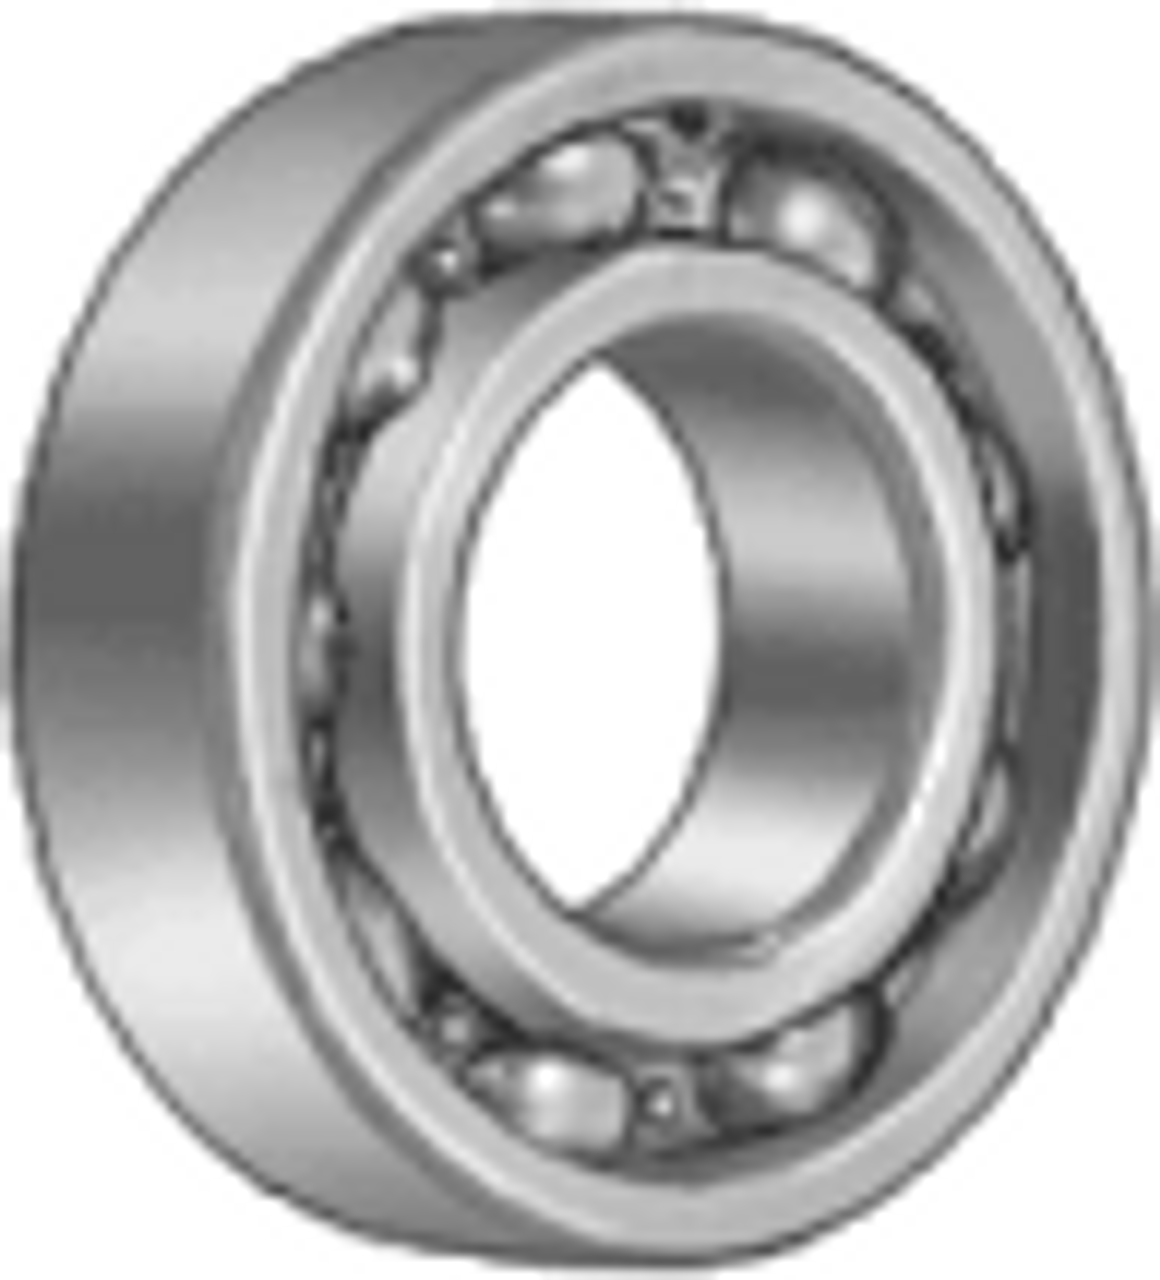 Looking for Zenith 440 Pelvic Drop Side Bearing, Zenith 440 Pelvic Side Bearing, Zenith 440 Pelvic Drop Side Bearing for sale, Zenith Pelvic Drop Bearing, Zenith Bearing, Zenith Pelvic Bearing, Zenith 440 Bearing, Zenith 420 Bearing, Zenith 460 Bearing, Zenith Pelvic Drop Bearing for sale?